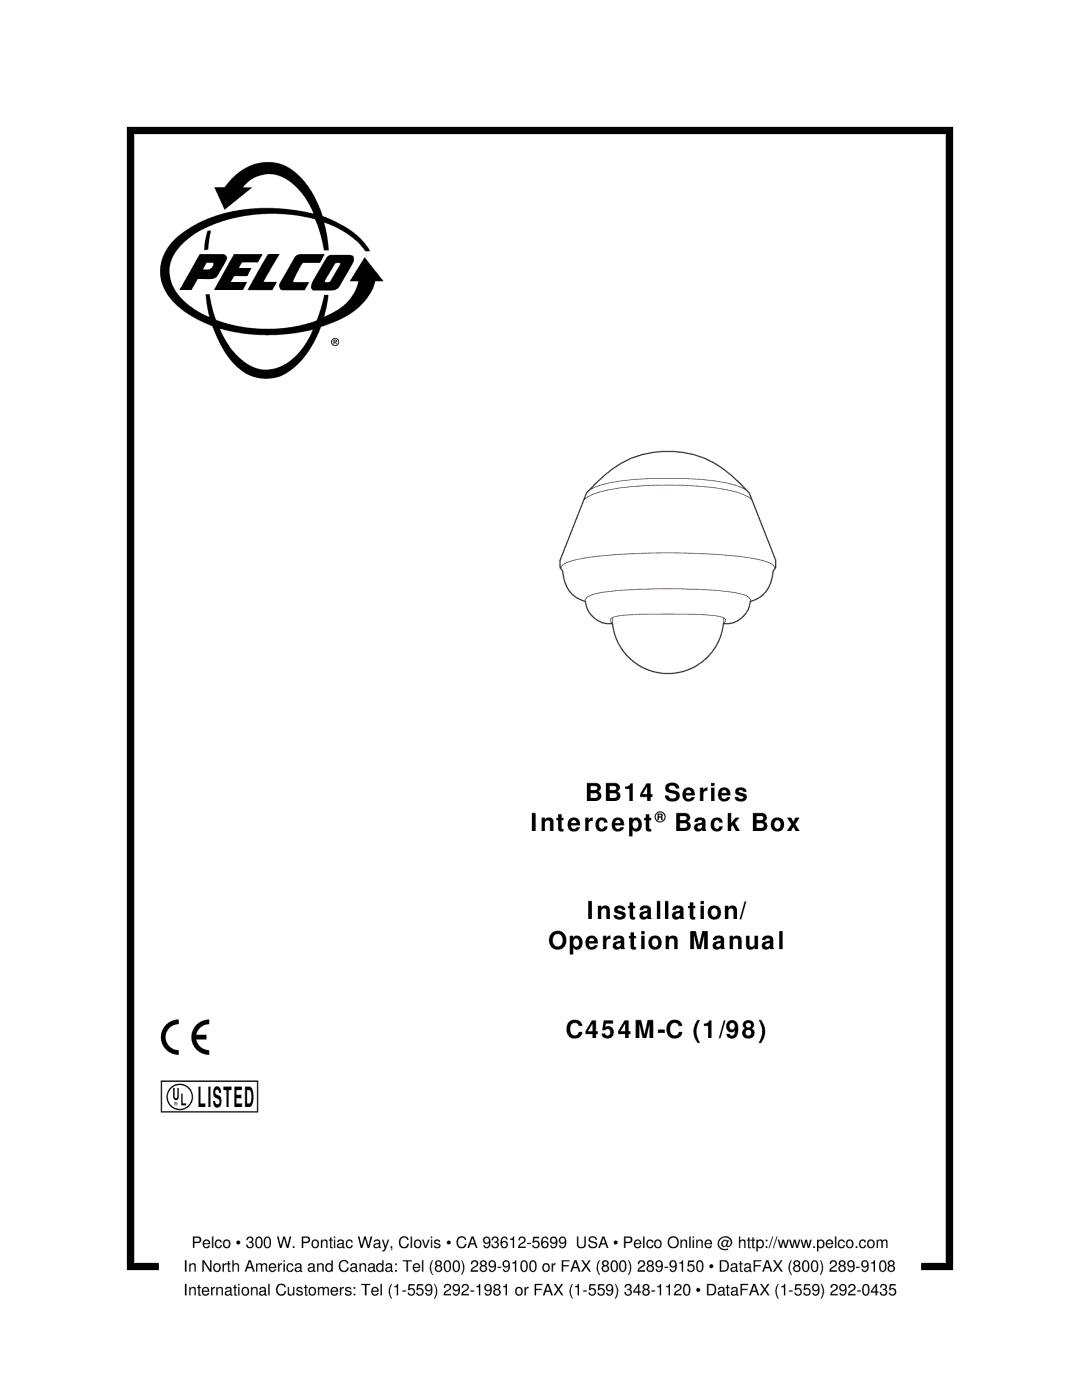 Pelco C454M-C operation manual Listed 